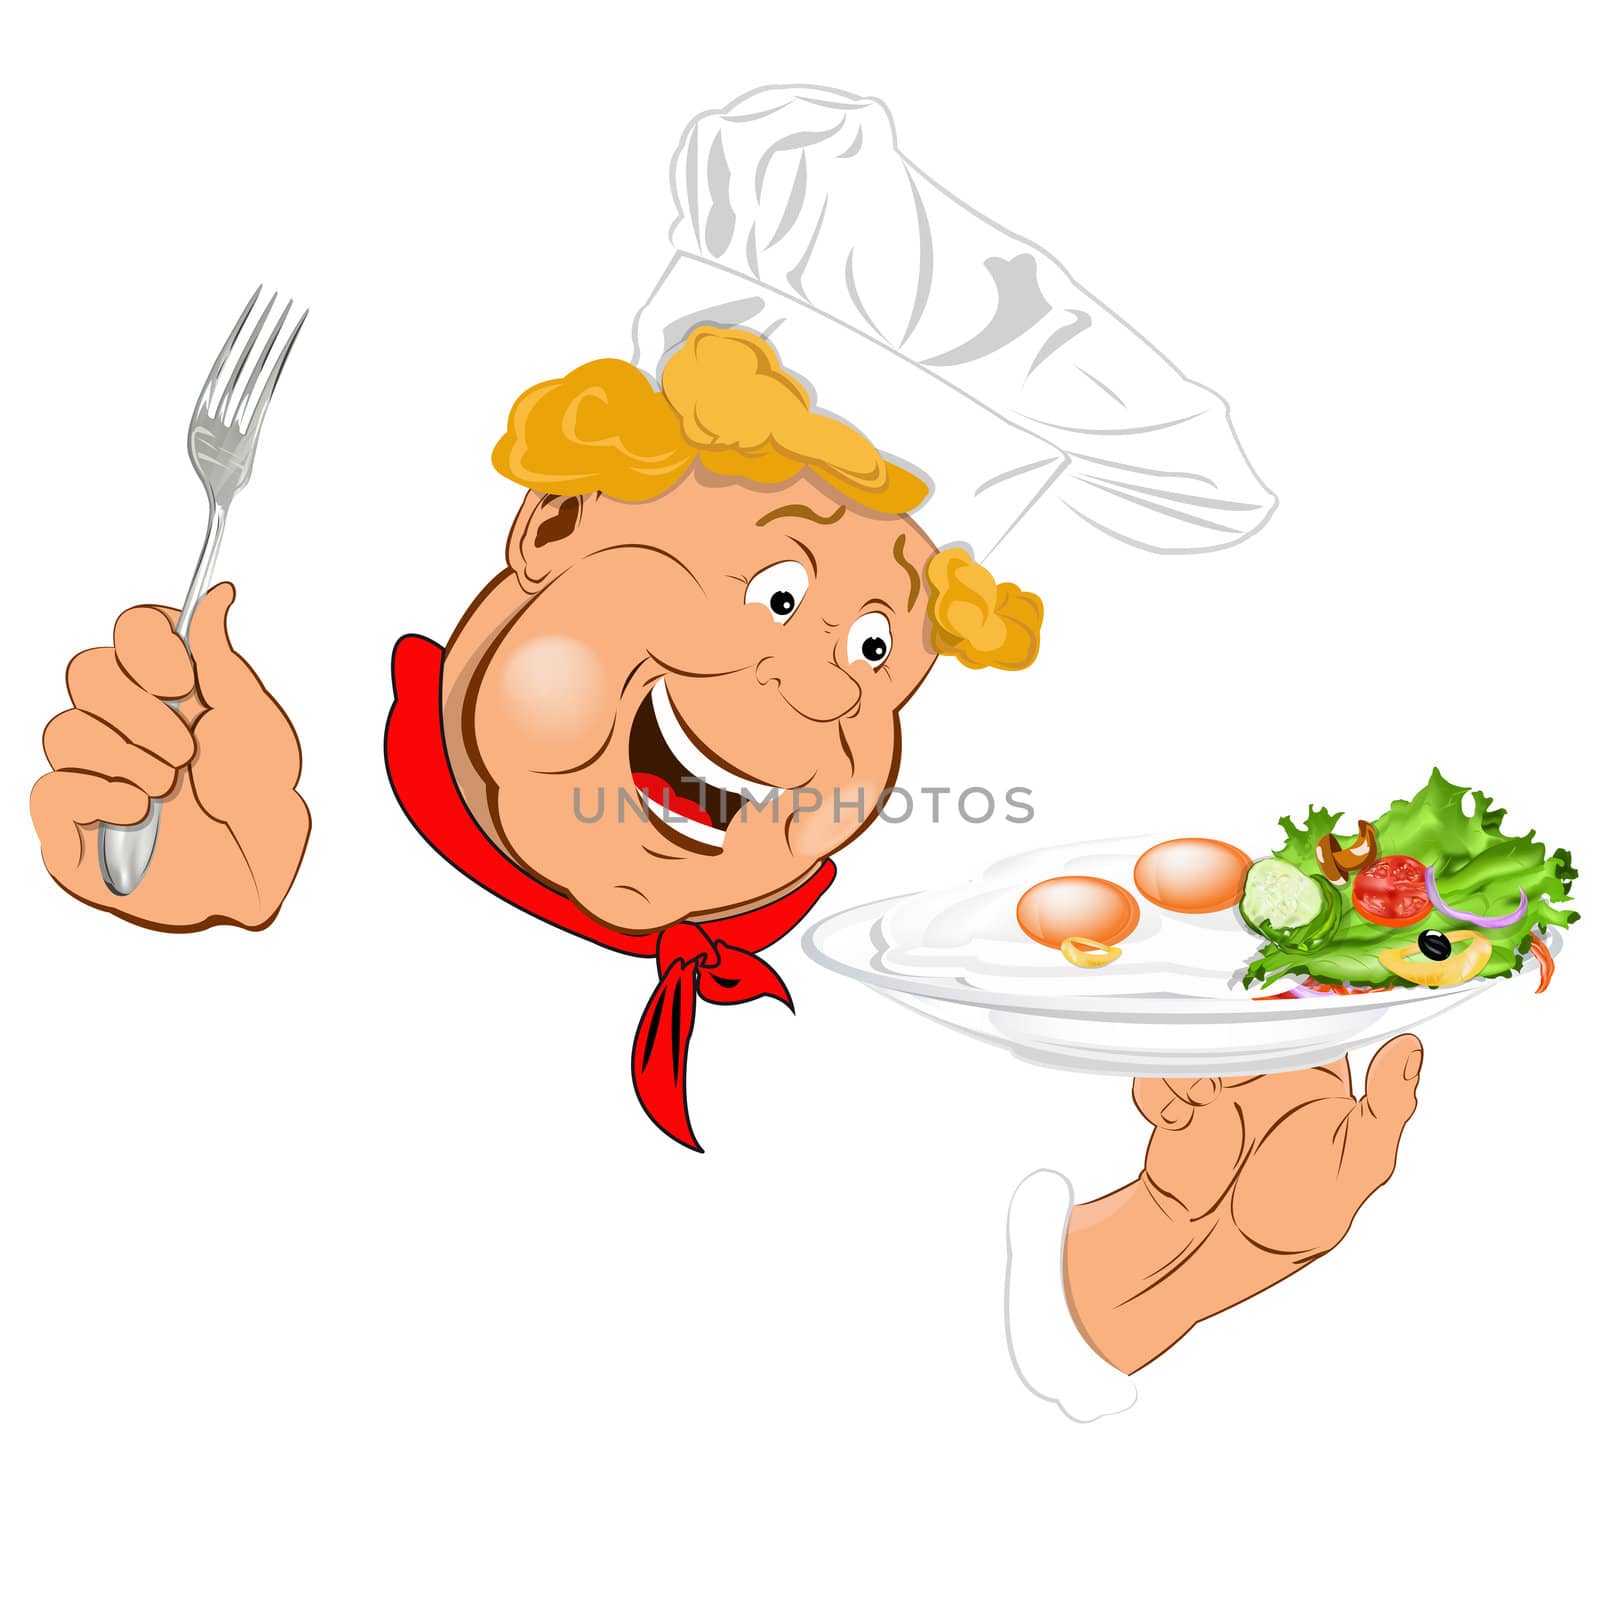 Funny Chef with scrambled eggs by sergey150770SV